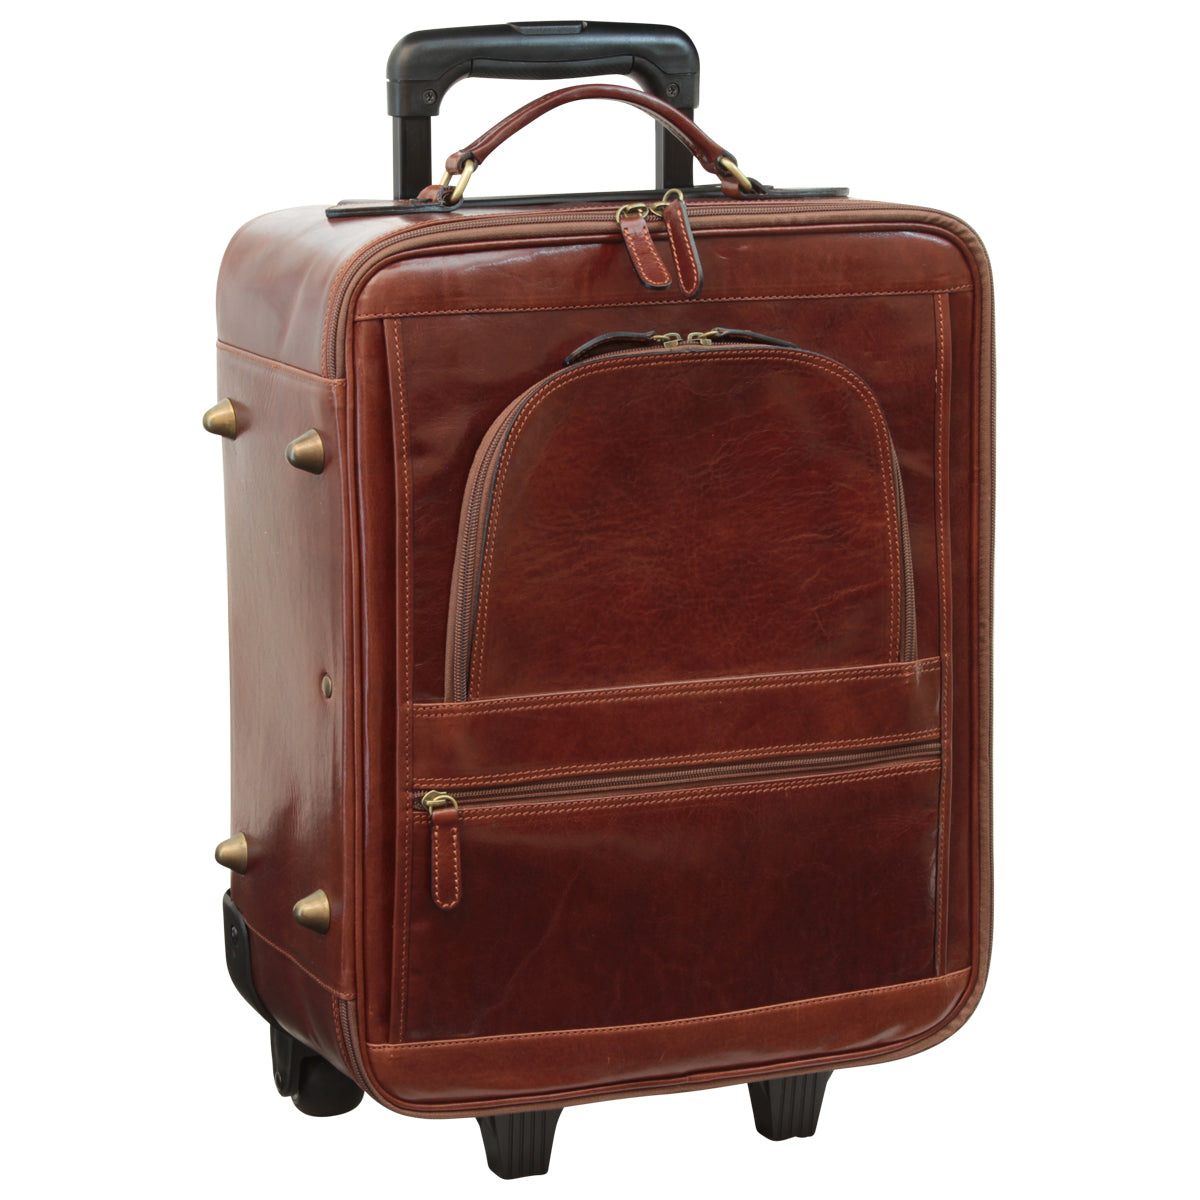 Trolley - Brown - Italian Cowhide Leather - Old Angler Italian Leather ...